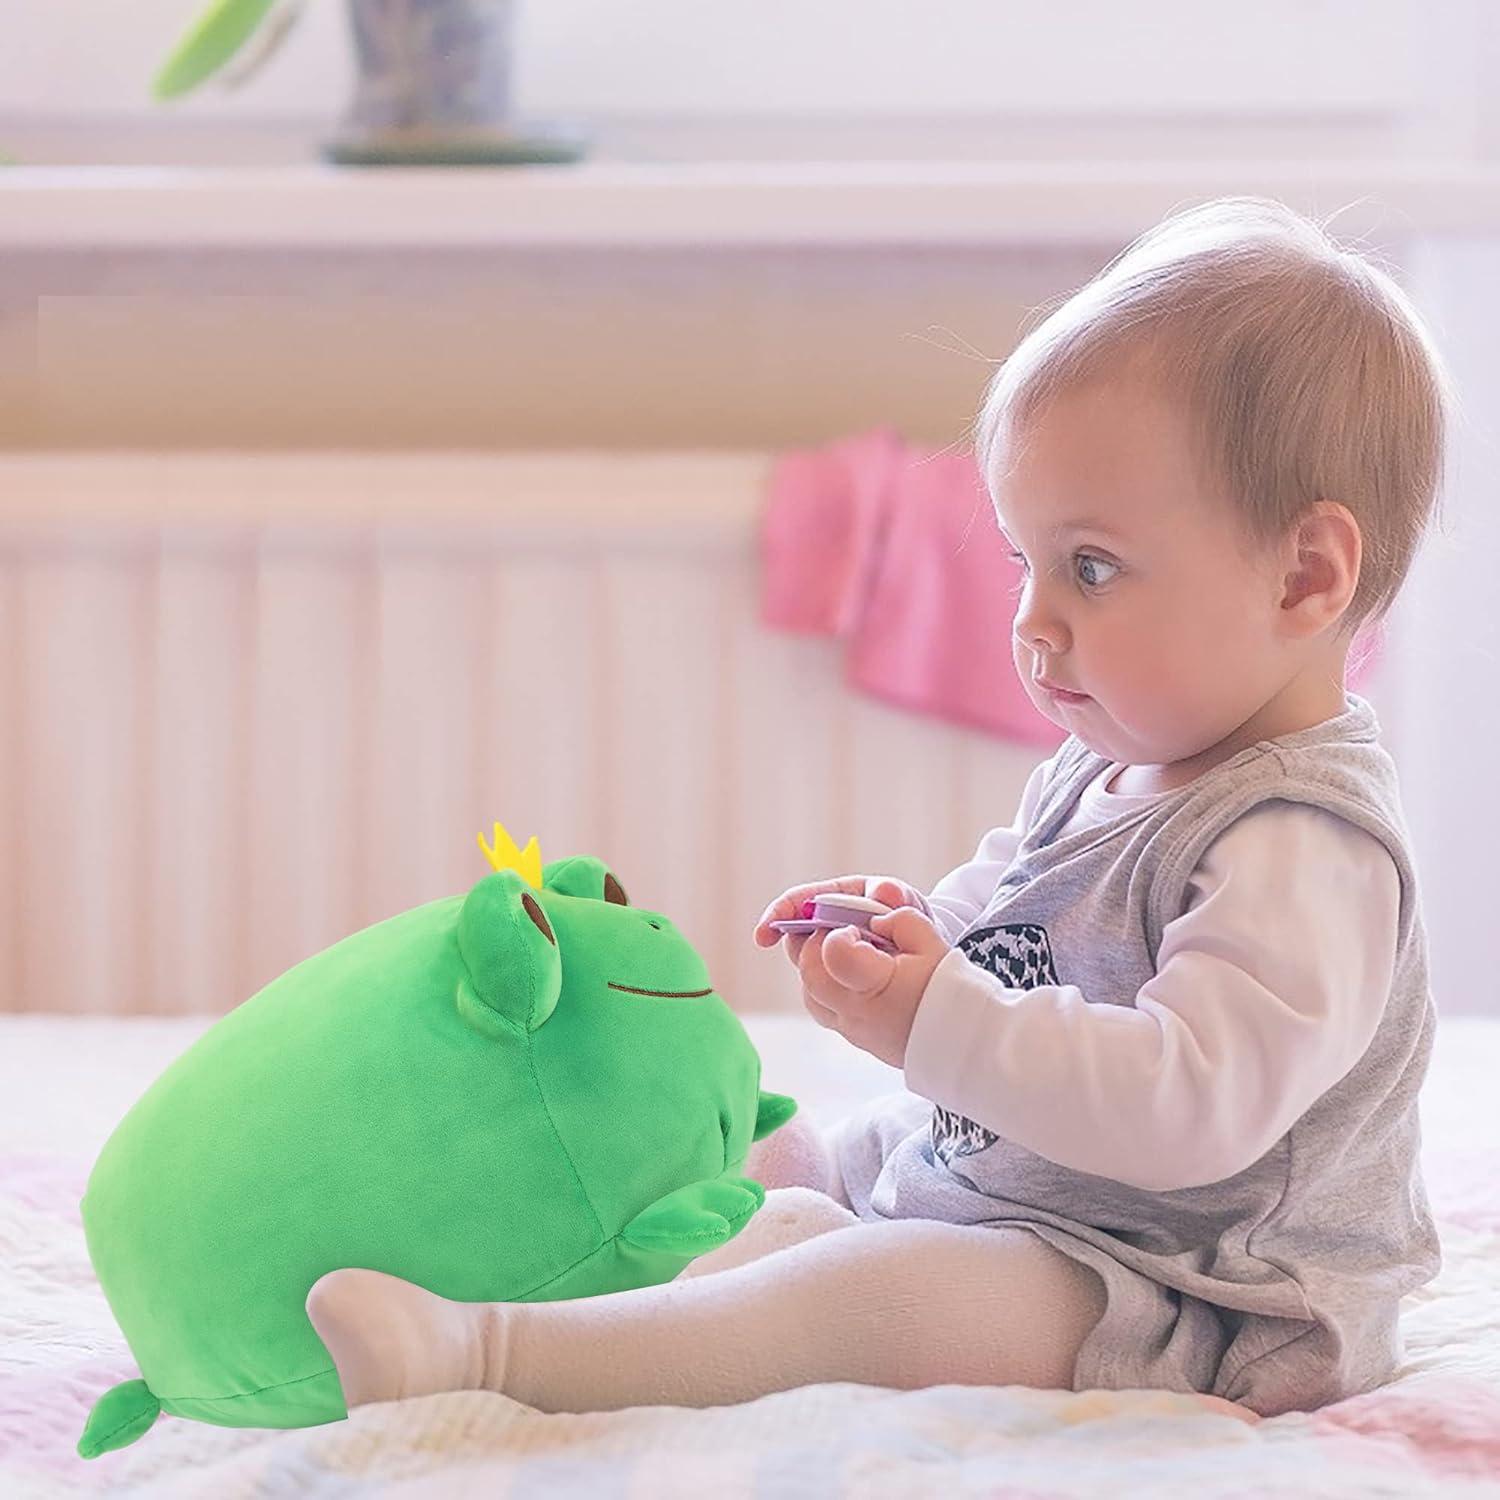 JUNERAIN Giant Frog Plush Soft Pillow Adorable Plush Frog Stuffed Animal  Cute Plushies Birthday for Kids Toddlers Boys Girls Unique Frog Stuffed Toy  Emerald Green 42cm